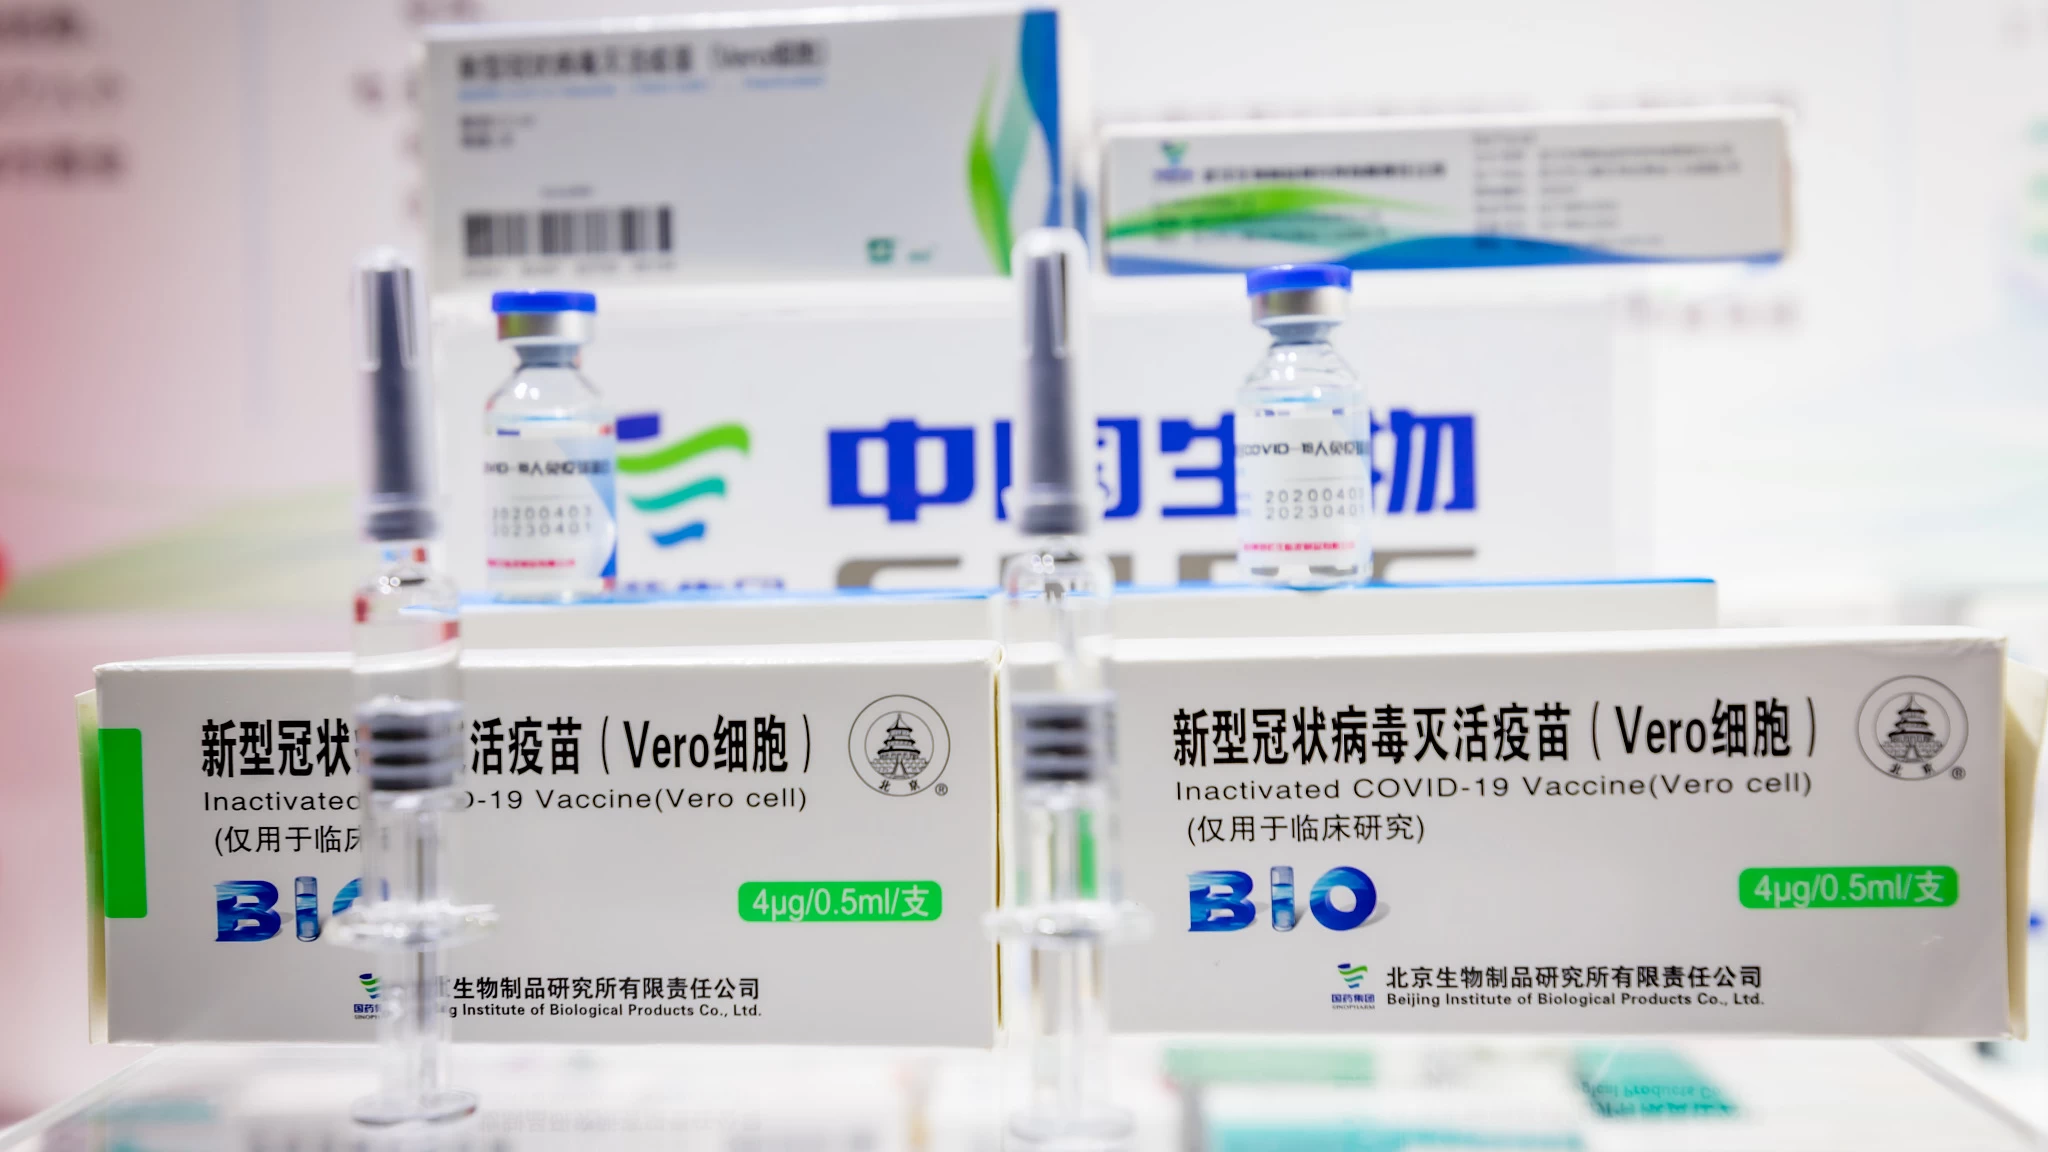 Another batch of SinoPharm vaccine arrives from China